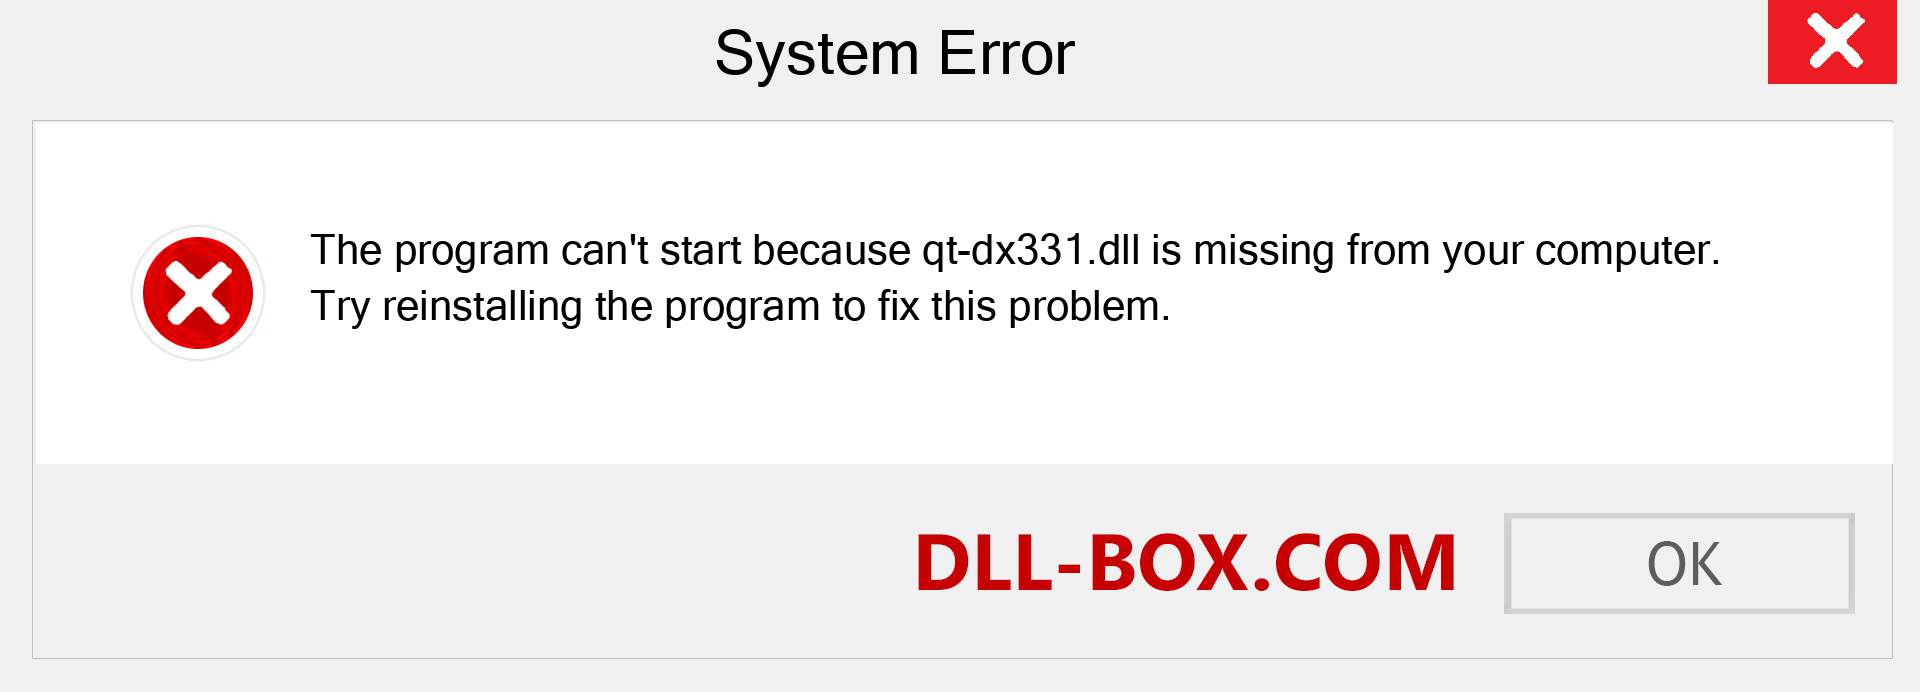  qt-dx331.dll file is missing?. Download for Windows 7, 8, 10 - Fix  qt-dx331 dll Missing Error on Windows, photos, images